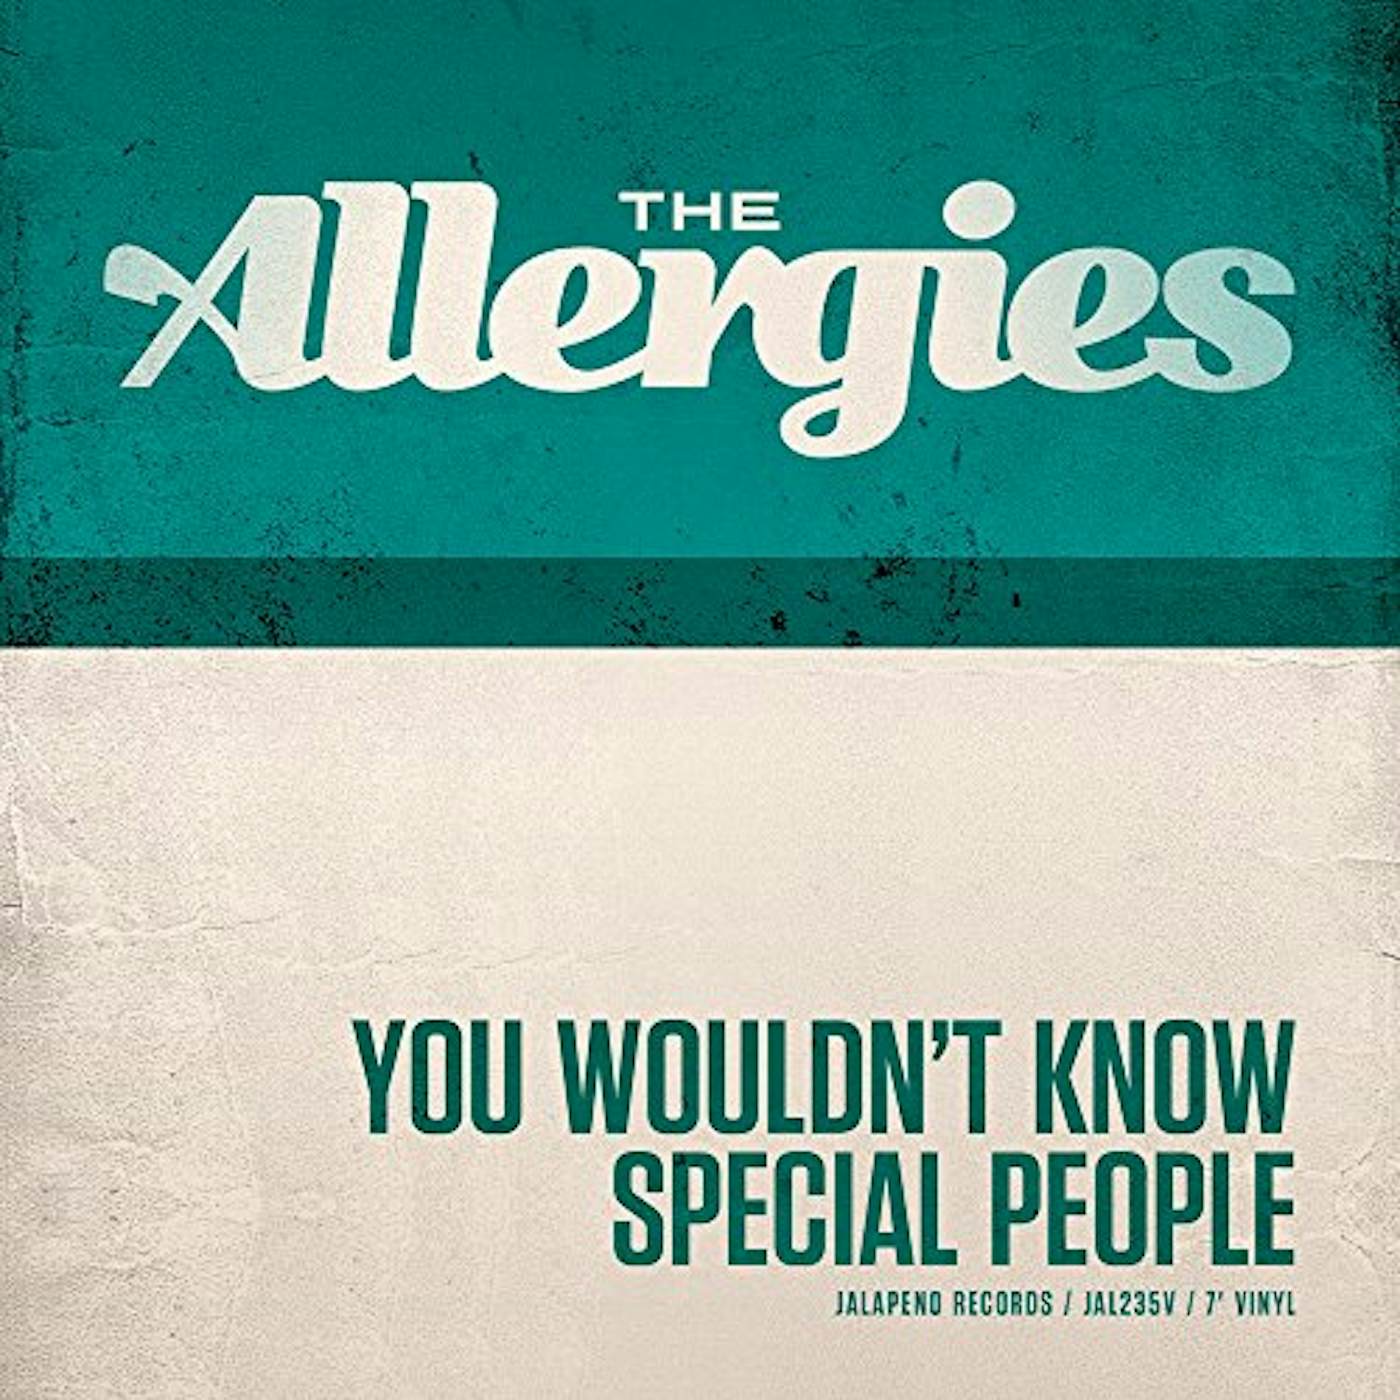 The Allergies YOU WOULDN'T KNOW / SPECIAL PEOPLE Vinyl Record